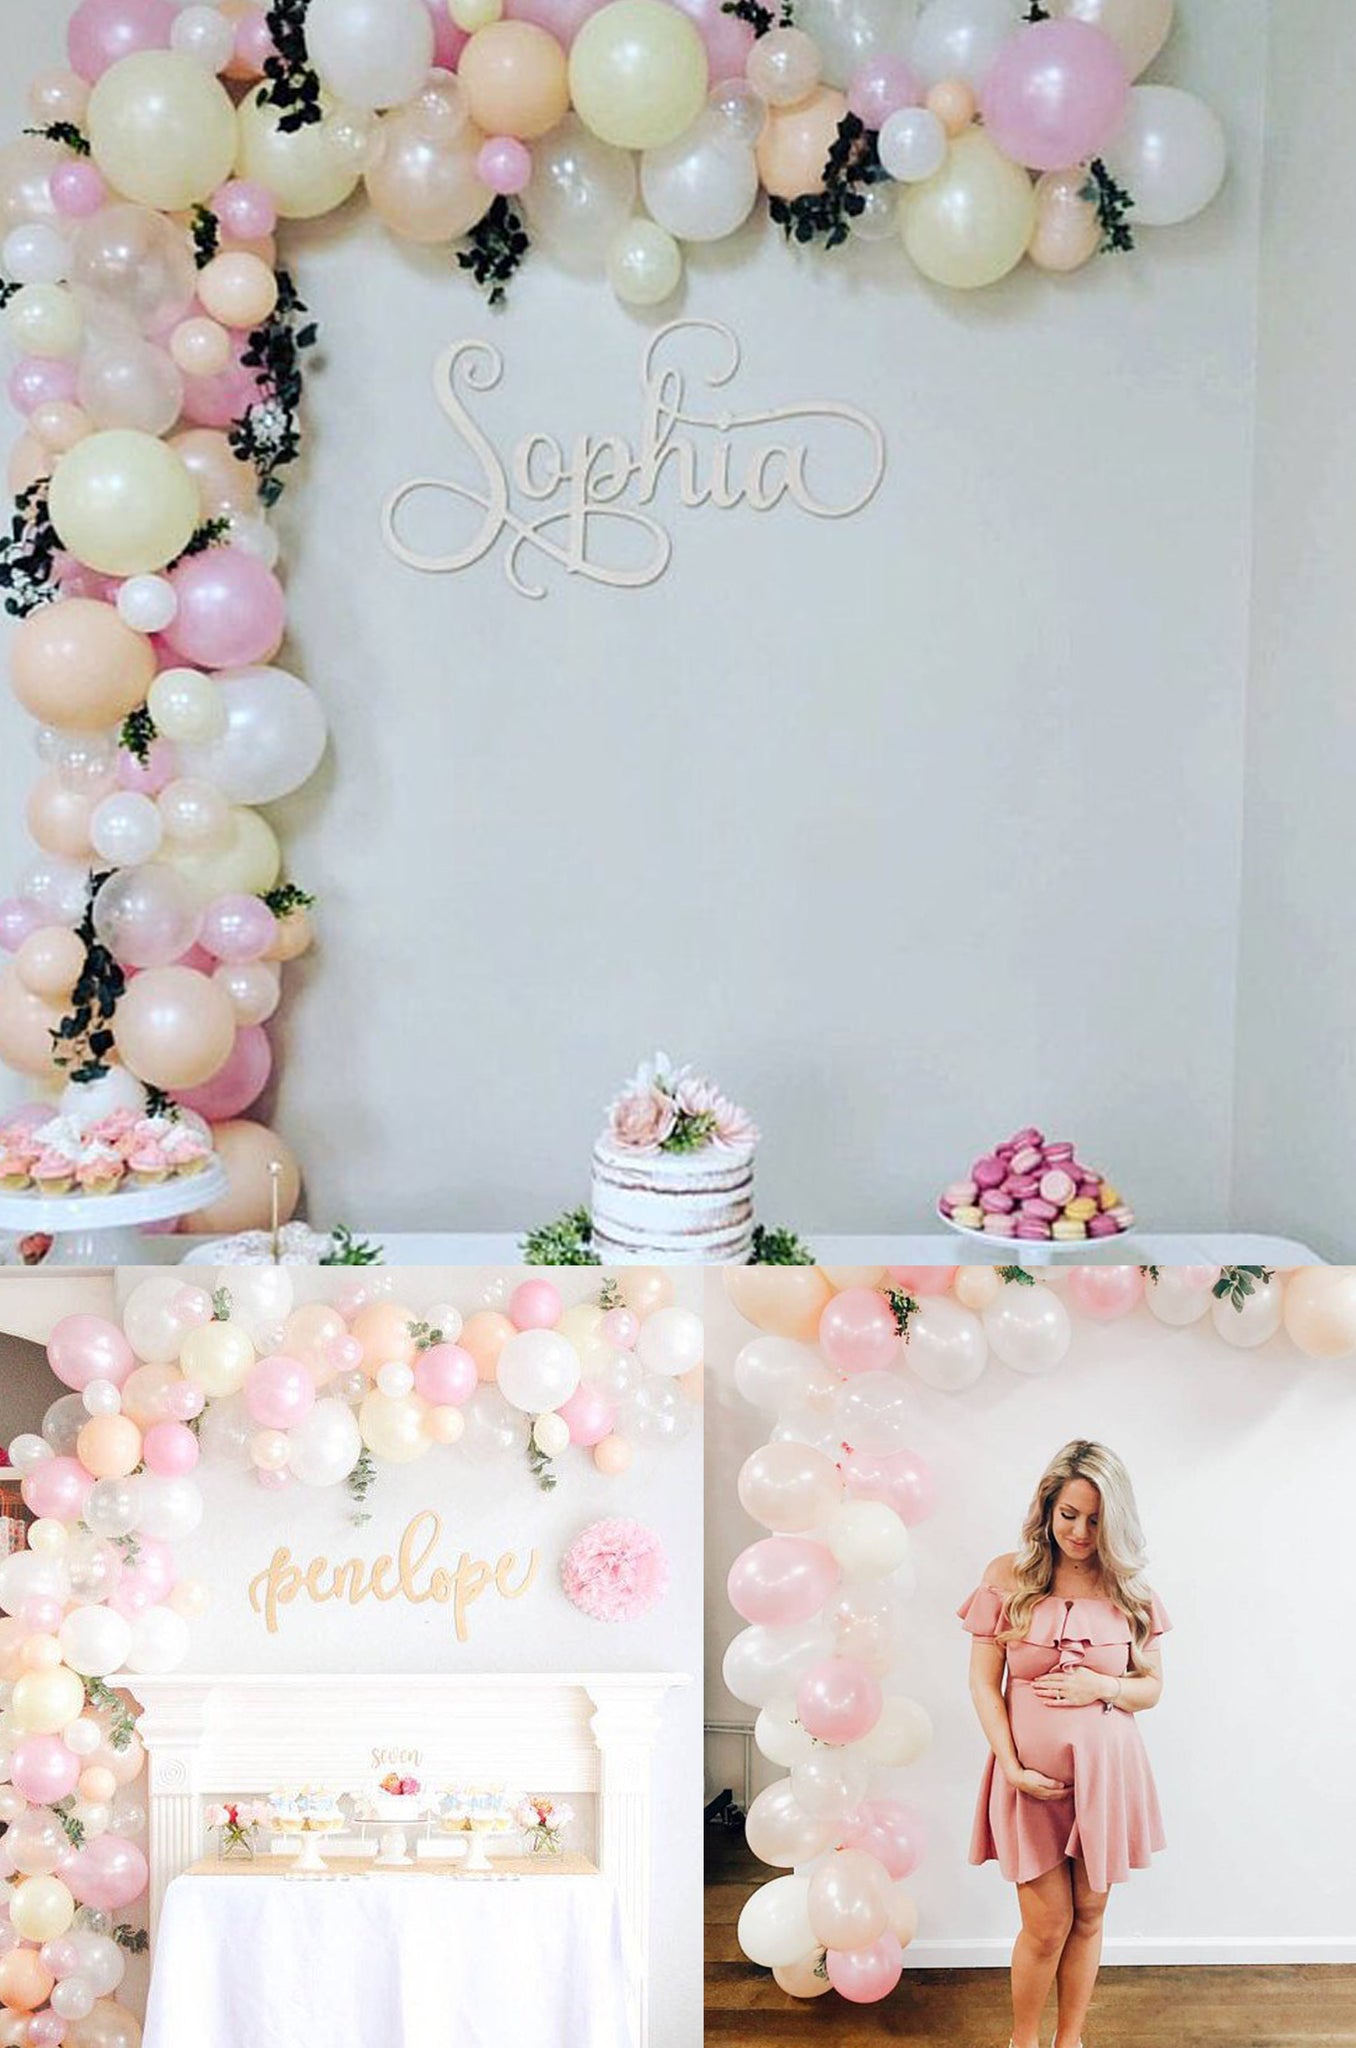 DIY Balloon Garland - DIY Balloon Arch for Baby Shower and Bridal Shower Decorations - Pretty Collected